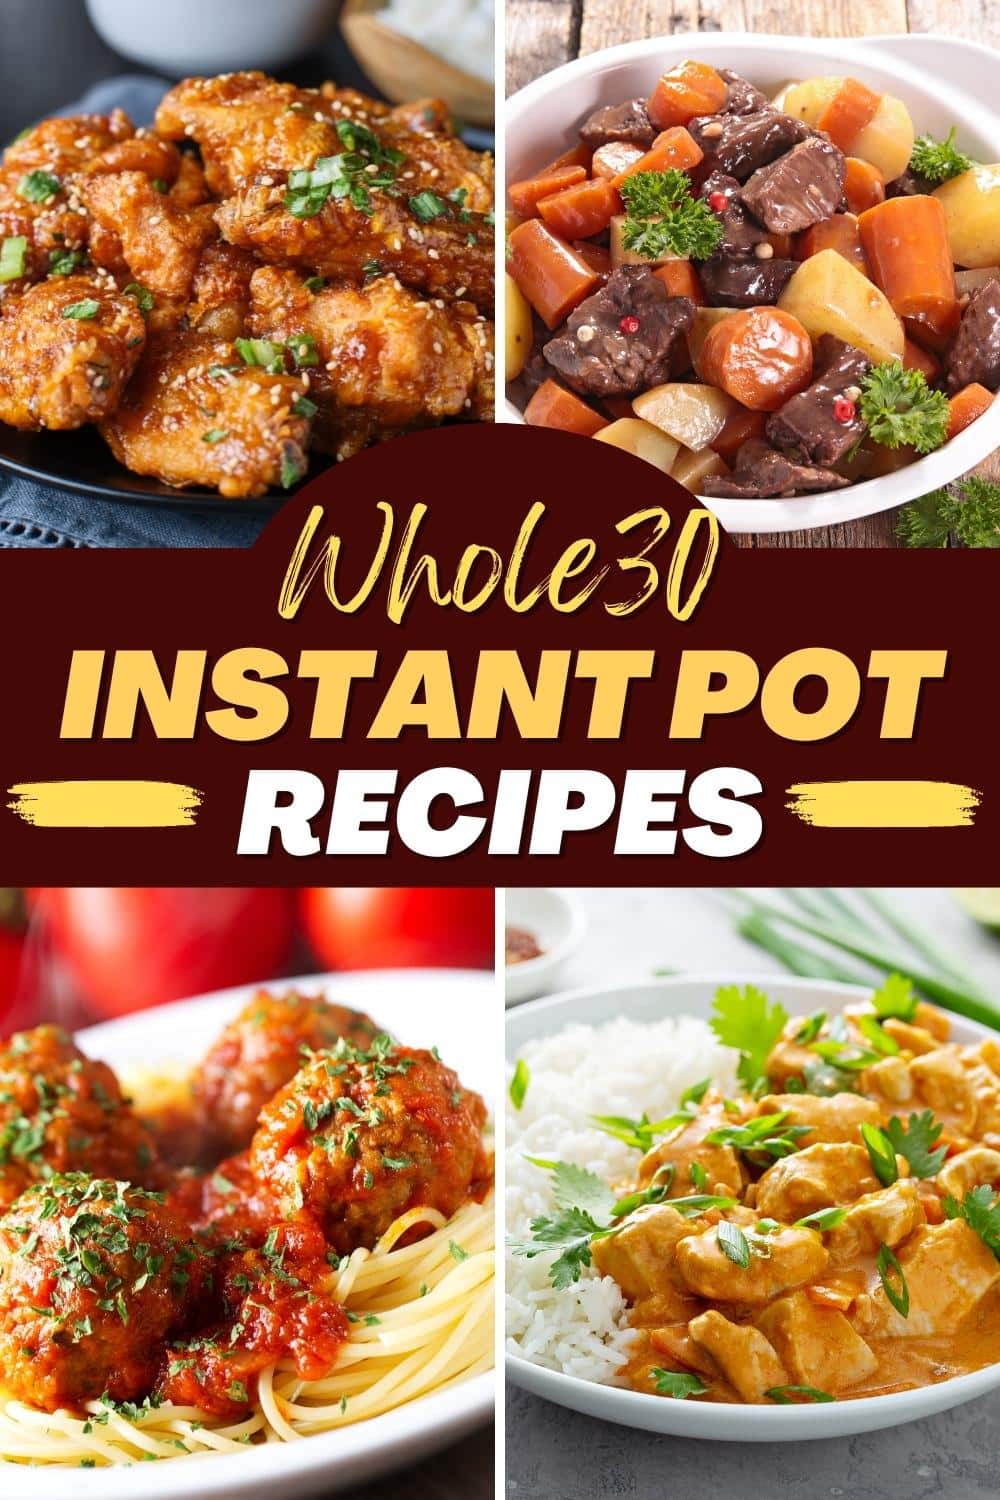 37 Best Whole30 Instant Pot Recipes - Insanely Good